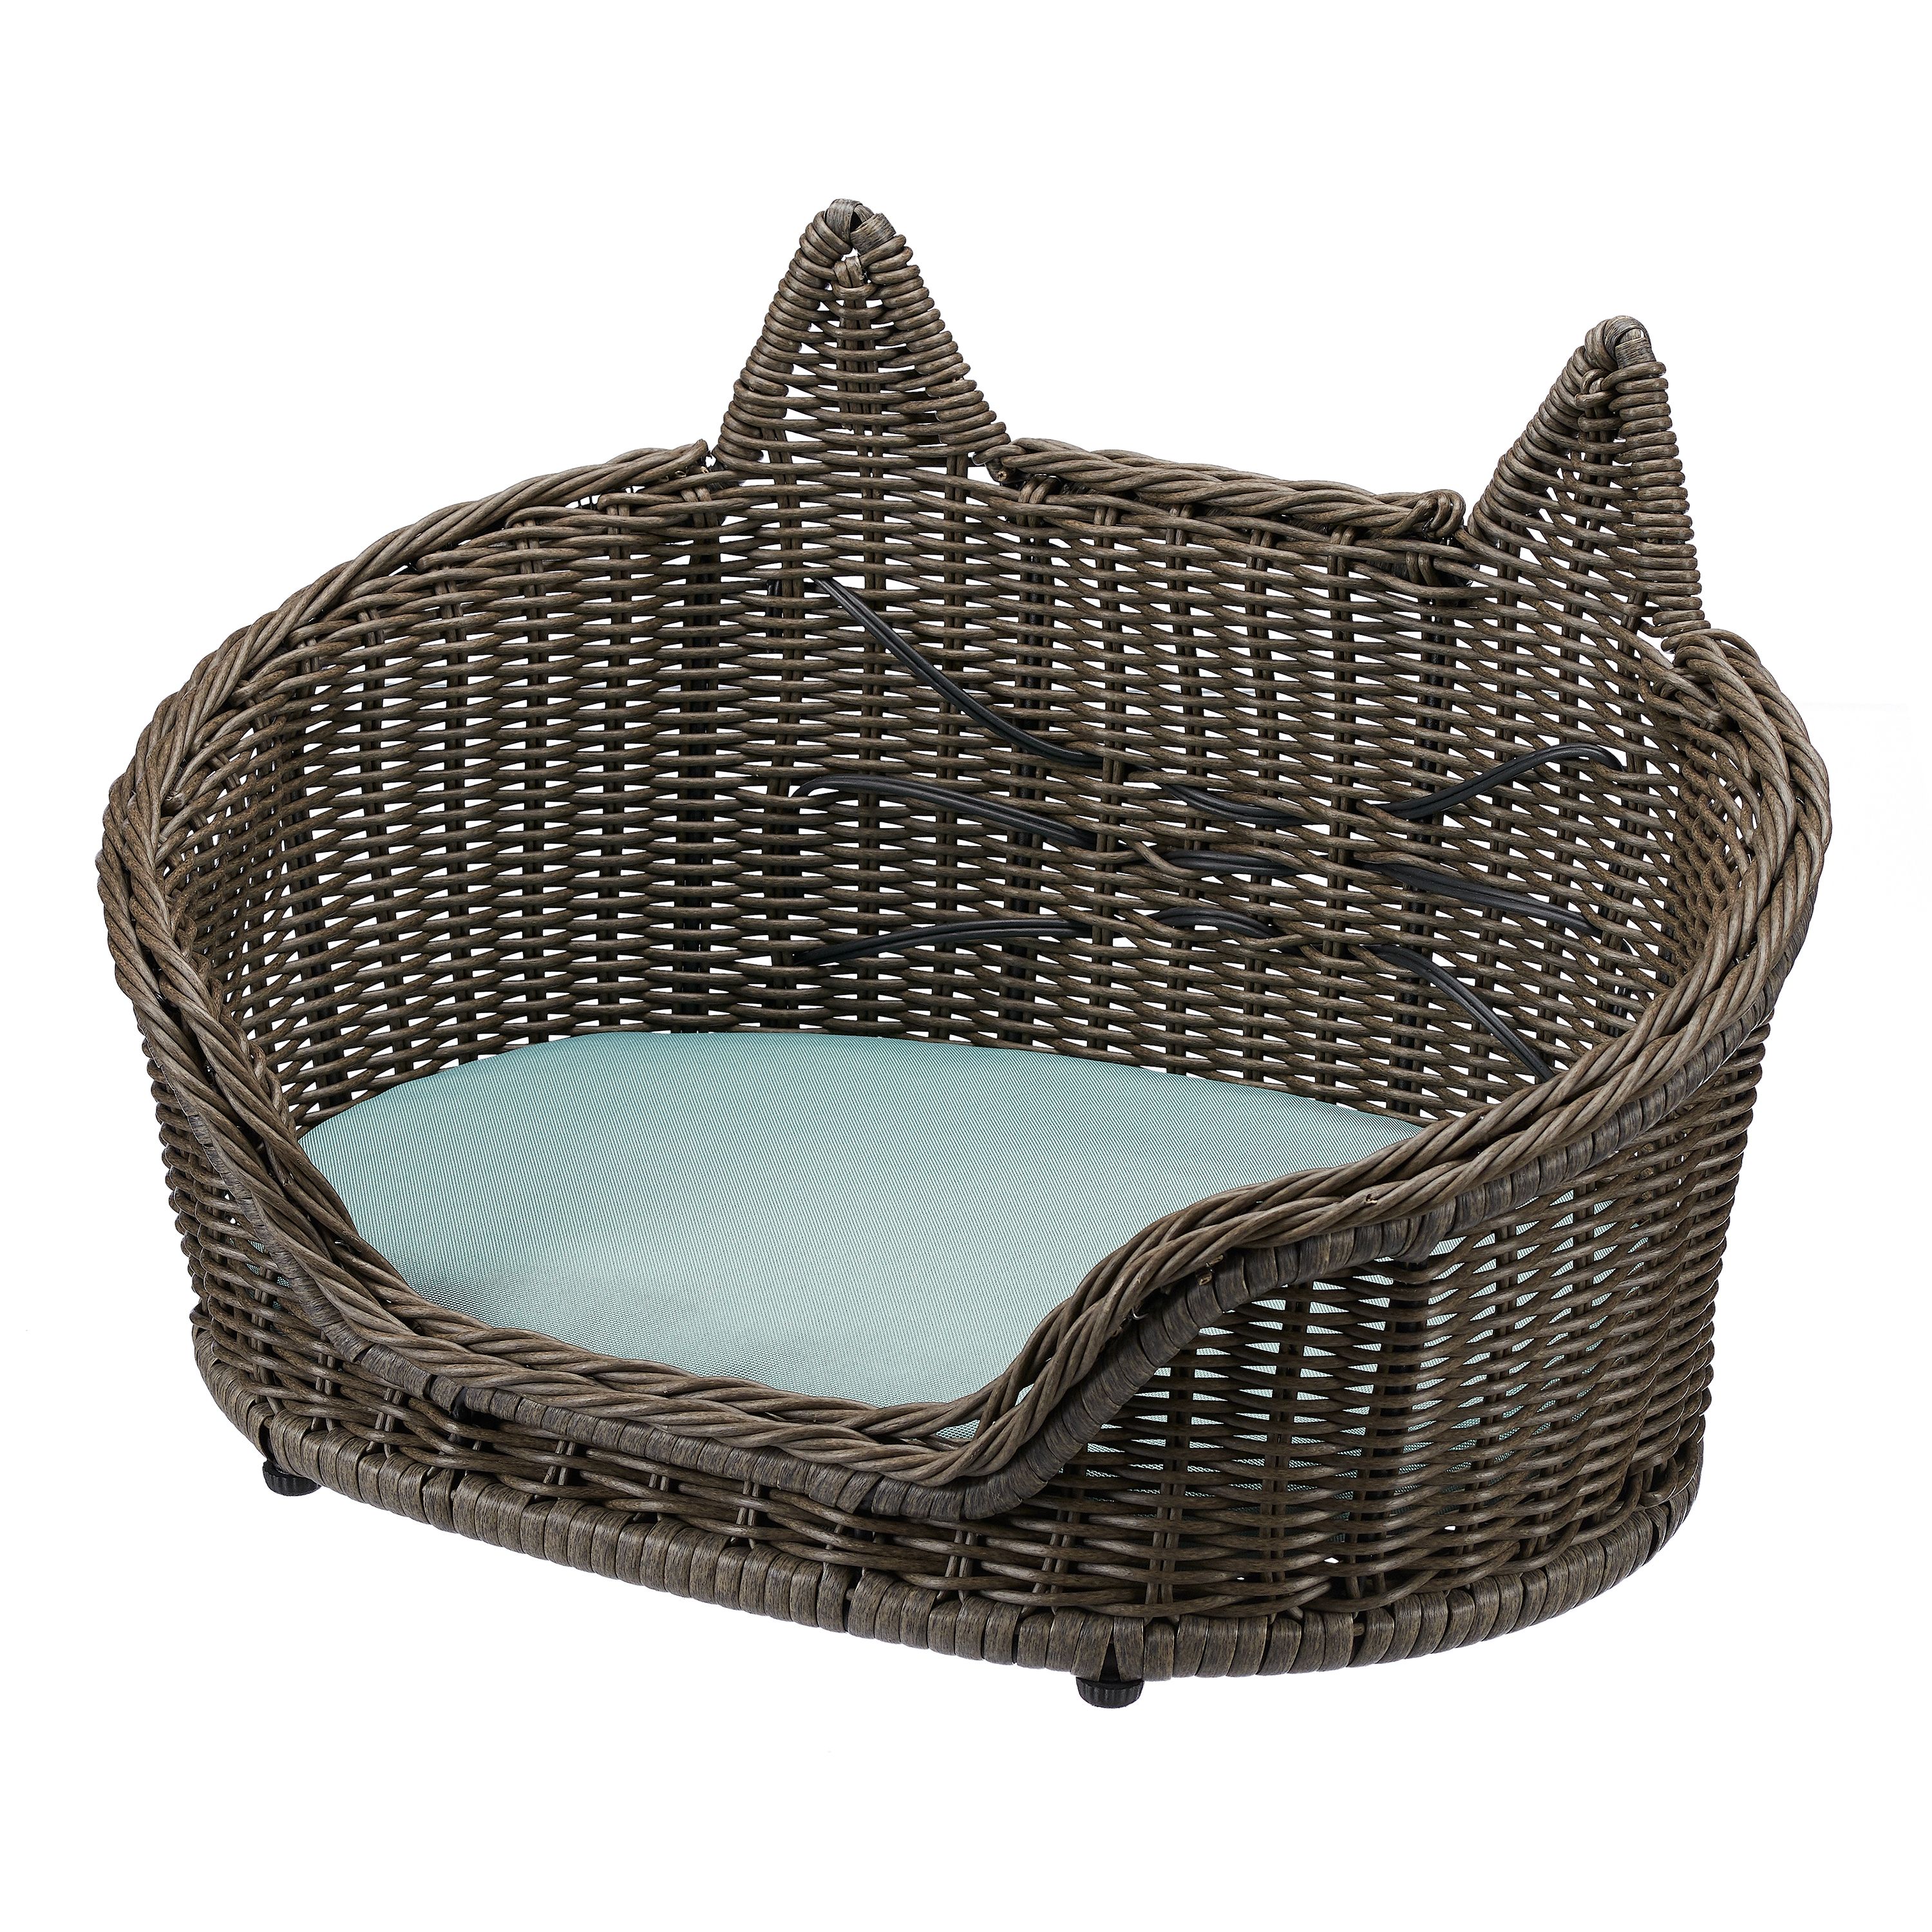 Drew Barrymore Wicker Cushion Pet Cat Bed, Brown - image 1 of 14